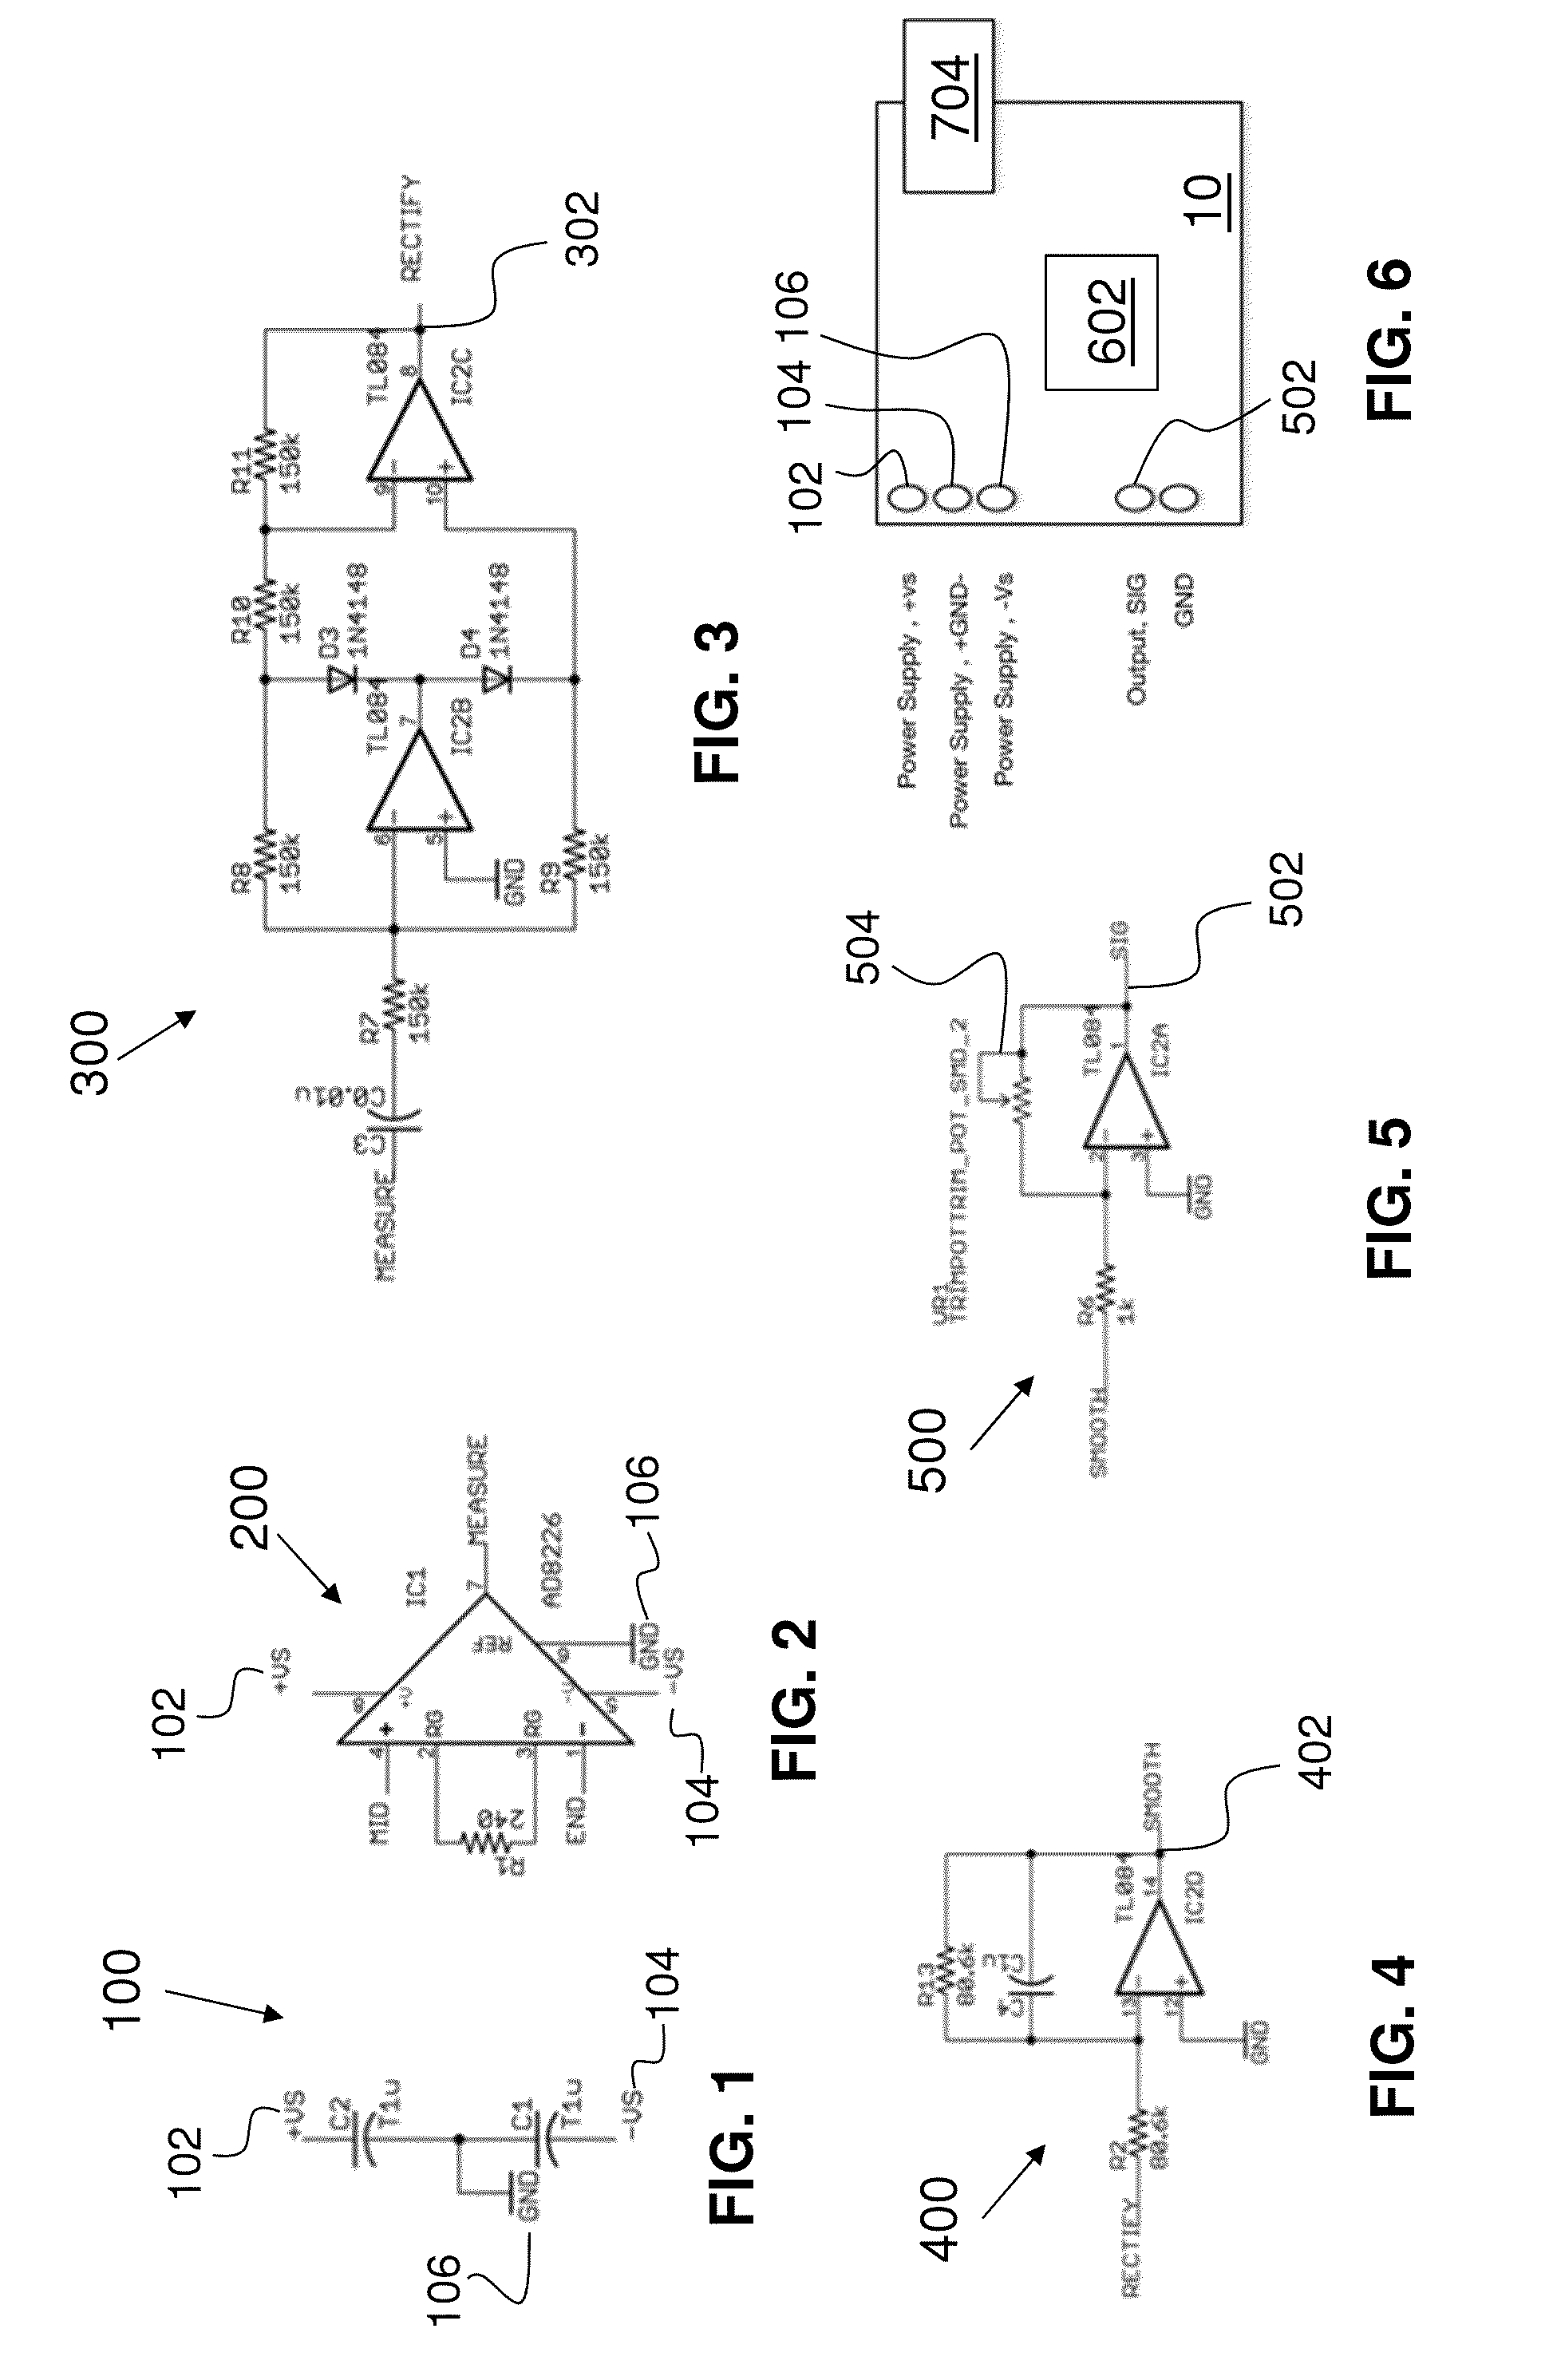 Systems and methods for compound motor action potential monitoring with neuromodulation of the pelvis and other body regions